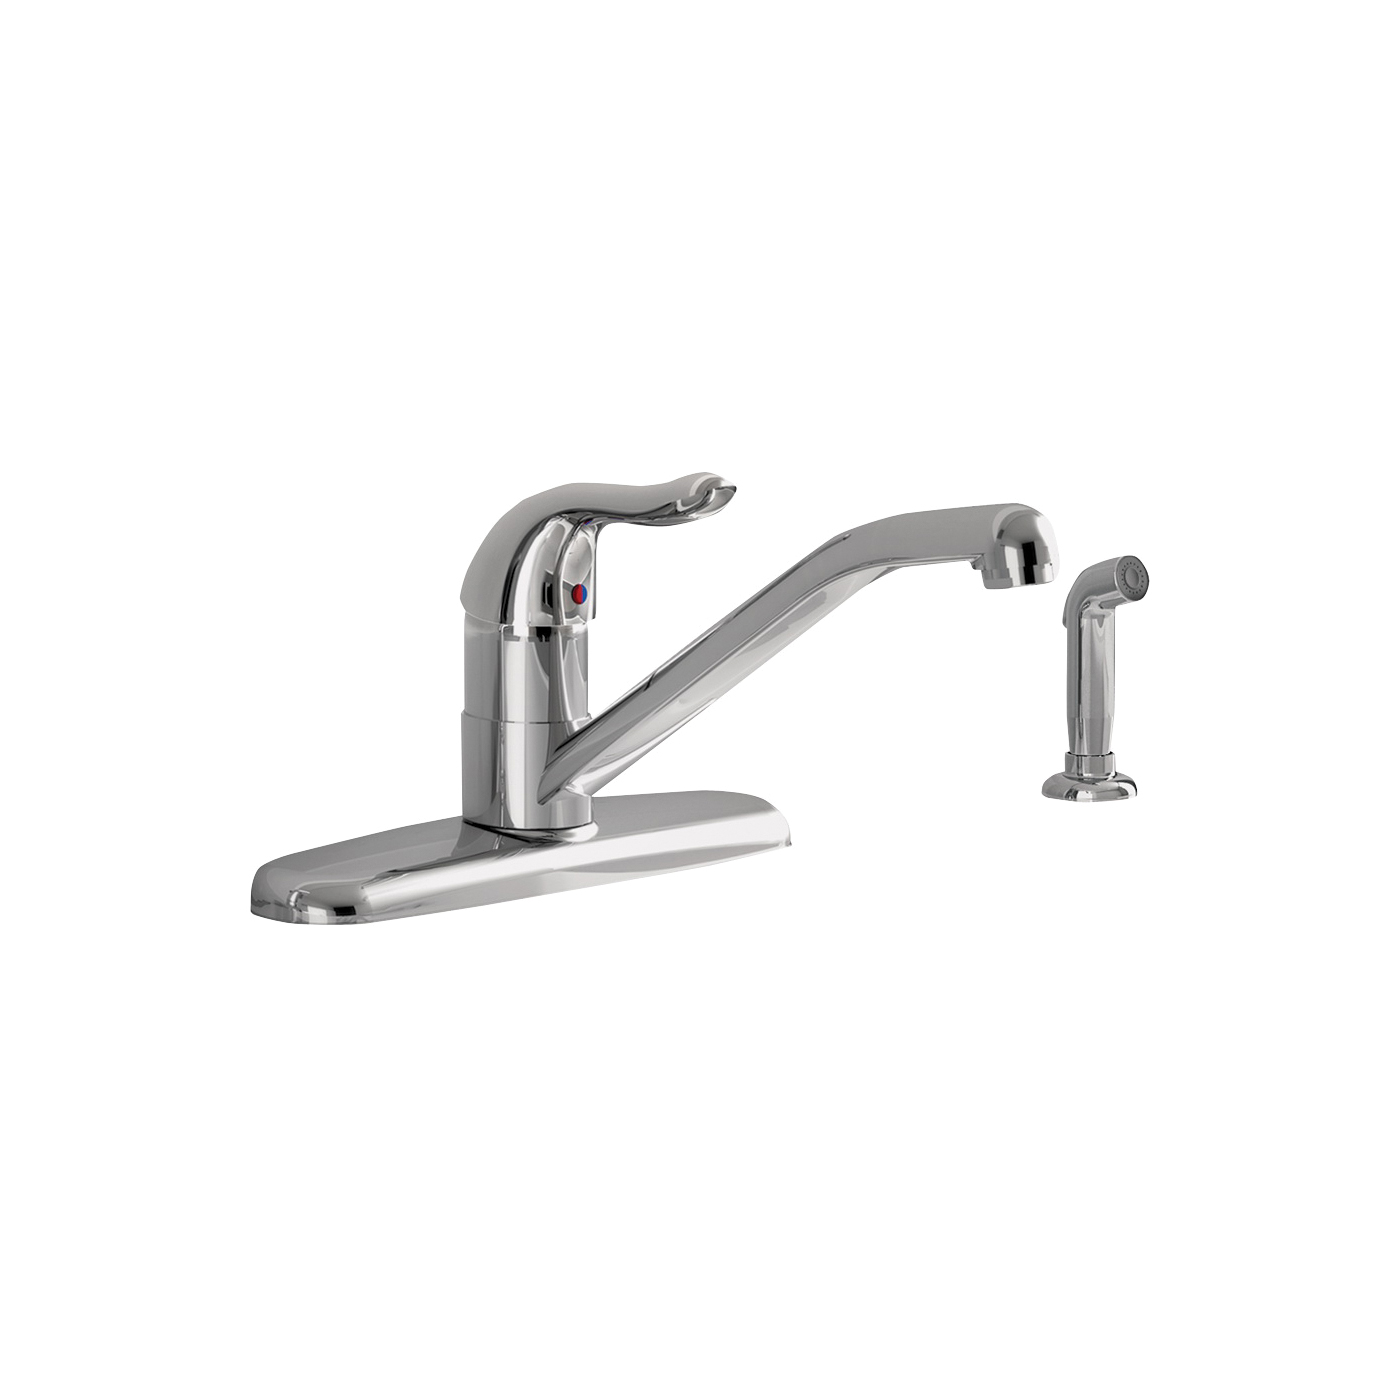 Jocelyn Series 9316.001.002 Kitchen Faucet with Side Sprayer, 1.8 gpm, 1-Faucet Handle, Brass